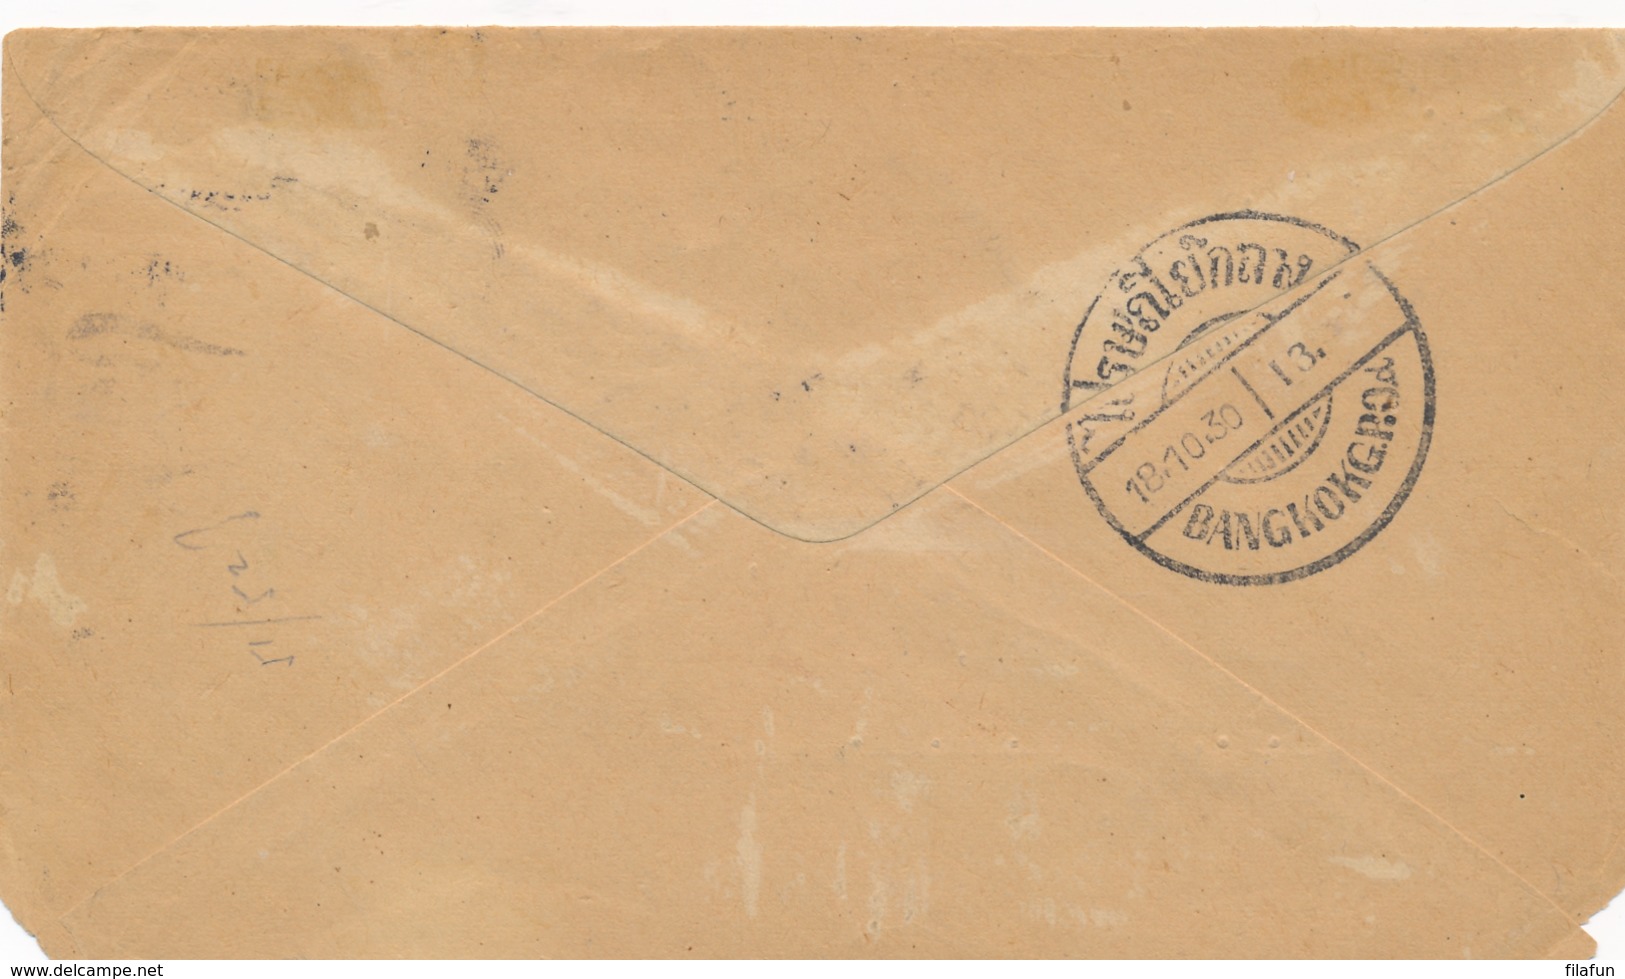 Nederlands Indië - 1930 - 1 Bath Airmail On Cover From Bangkok With First KLM Returnflight Via Amsterdam To USA - Netherlands Indies